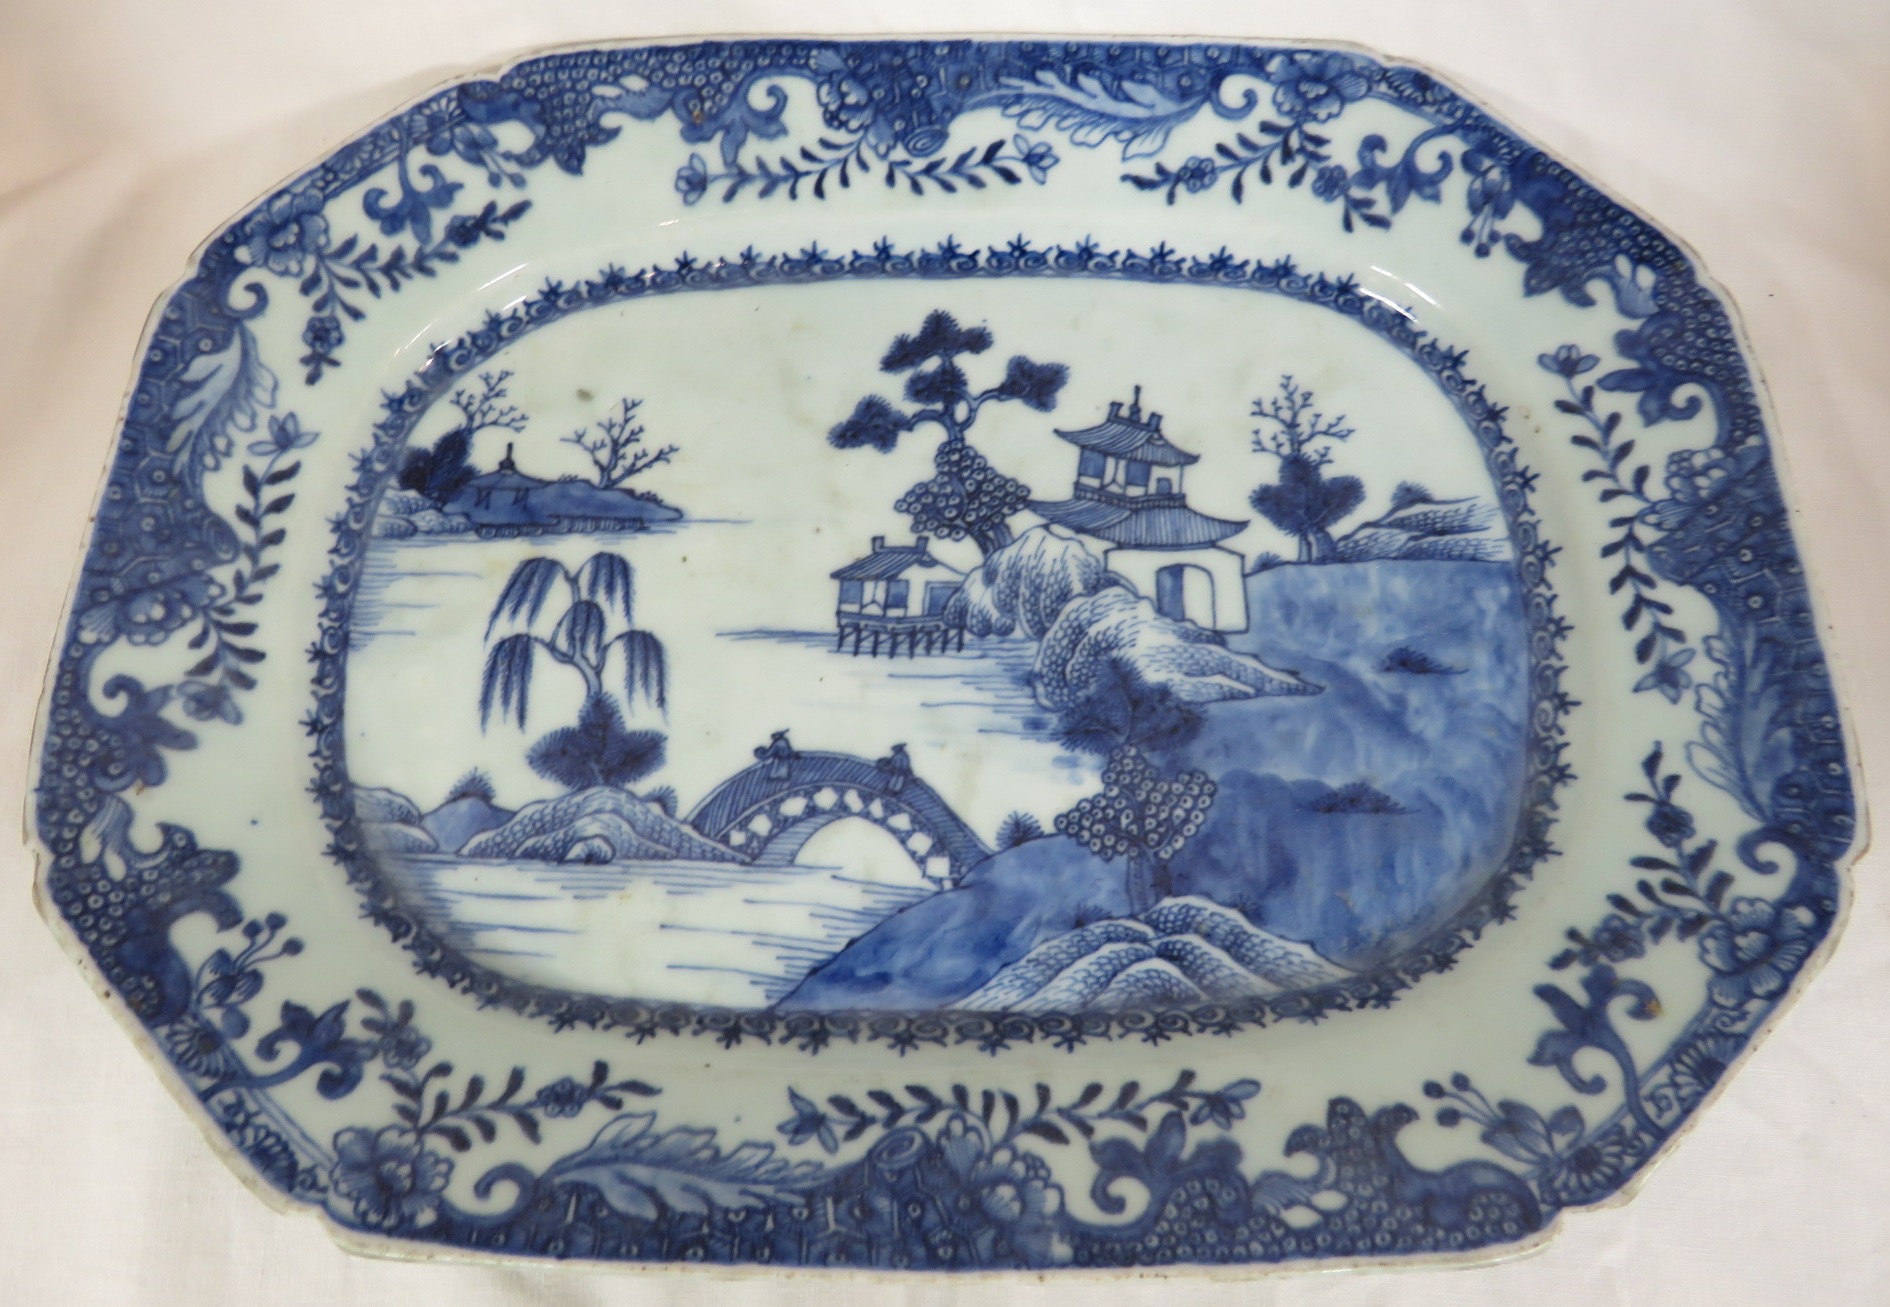 A porcelain dish or charger of octagonal oblong shape, decorated in underglaze blue in the Chinese